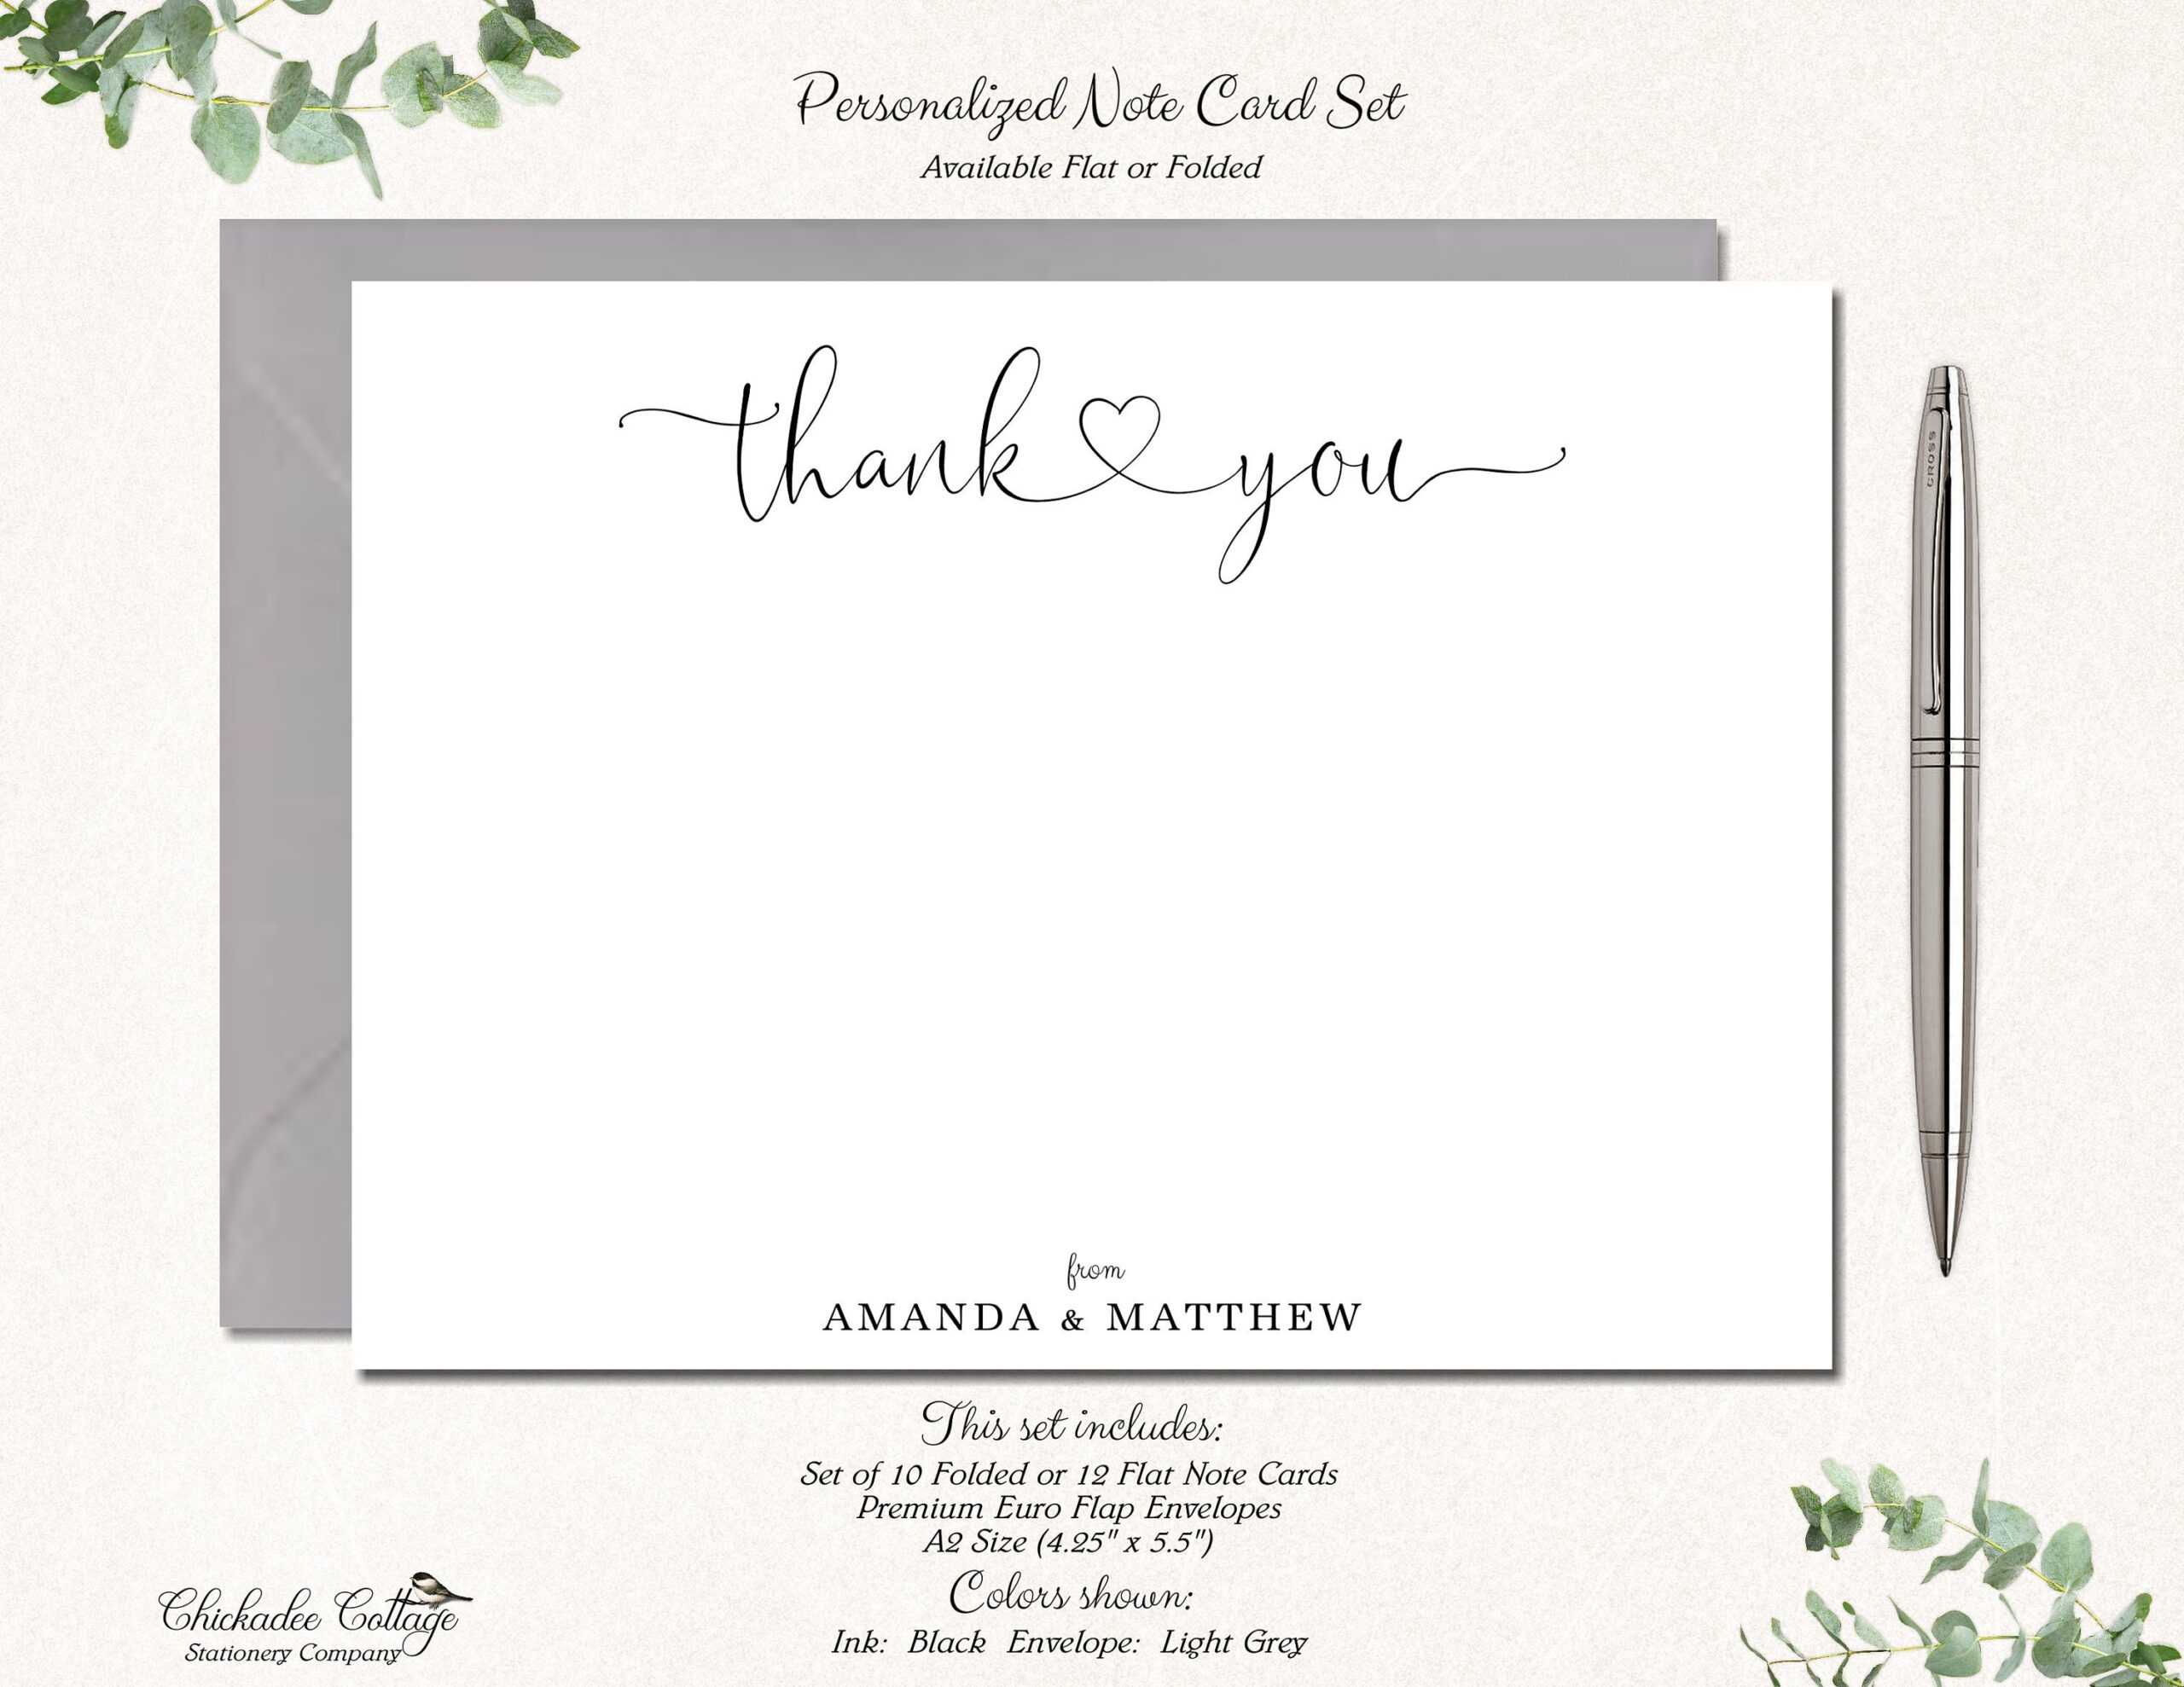 008 Template Ideas Il Fullxfull 1879552839 R9Yp Bridal Throughout Thank You Note Card Template